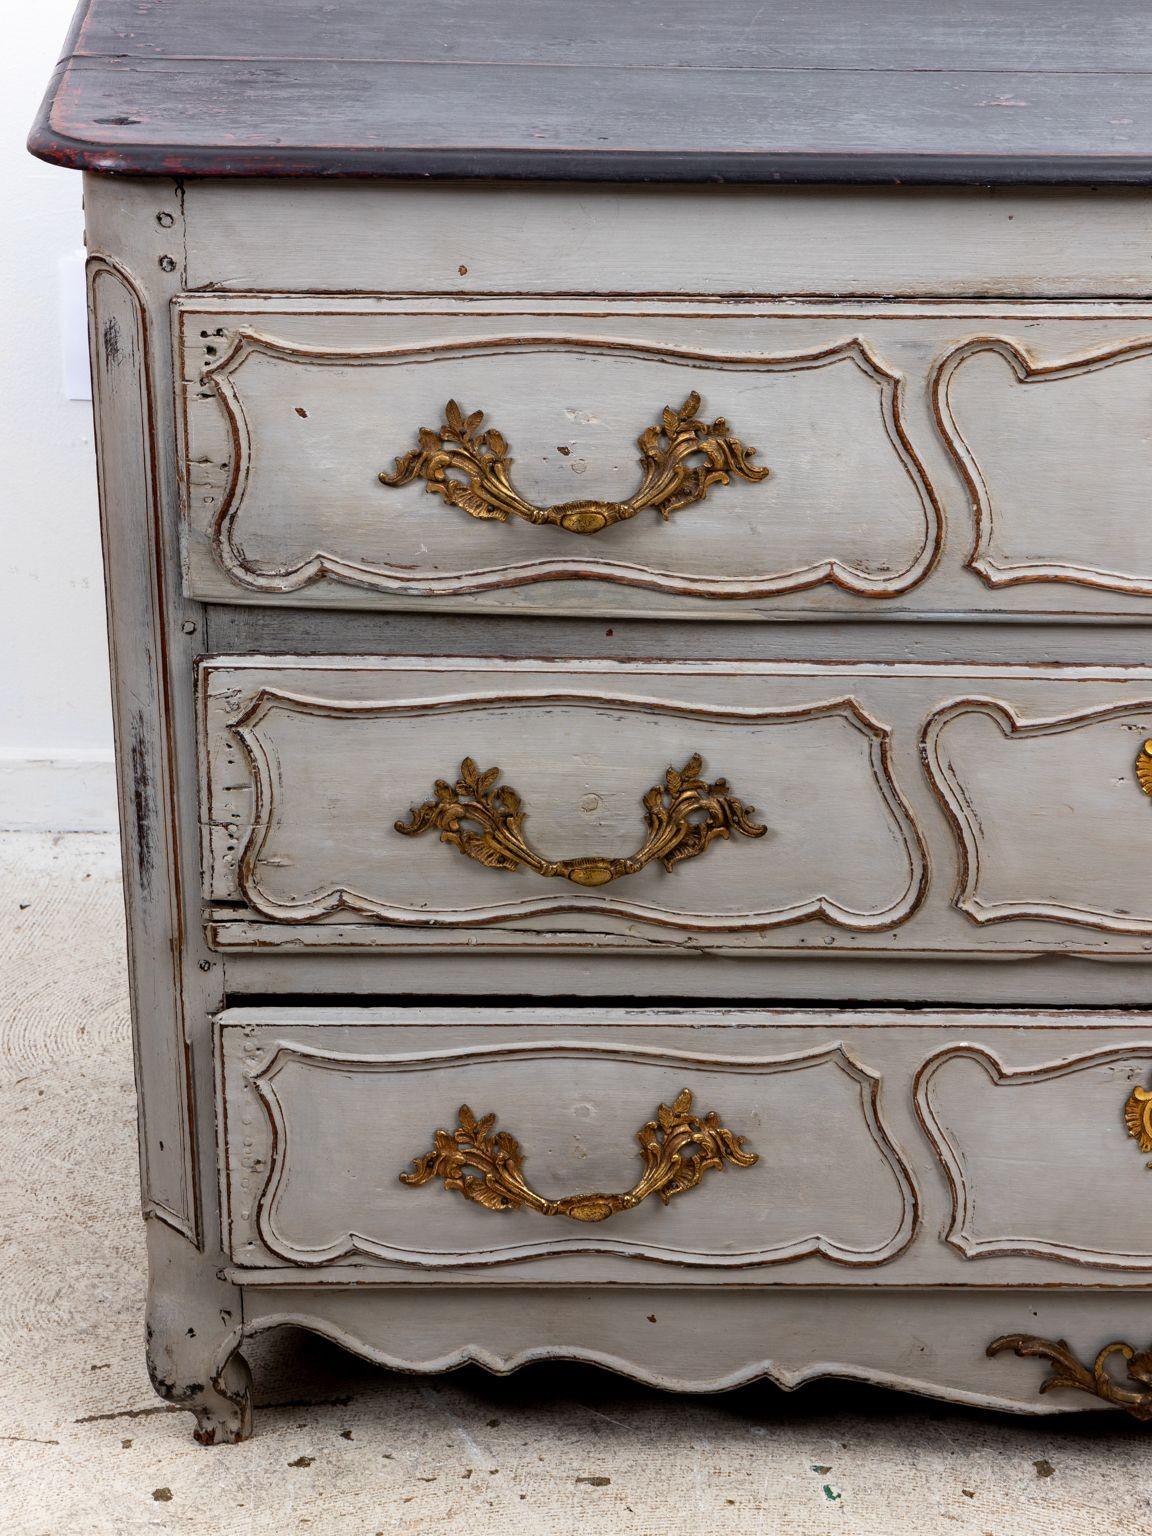 A late 19th Century Louis XIV style French commode with later gray paint. Brass pulls and escutcheons on three drawers. Darker gray painted top. Please note of wear consistent with age.